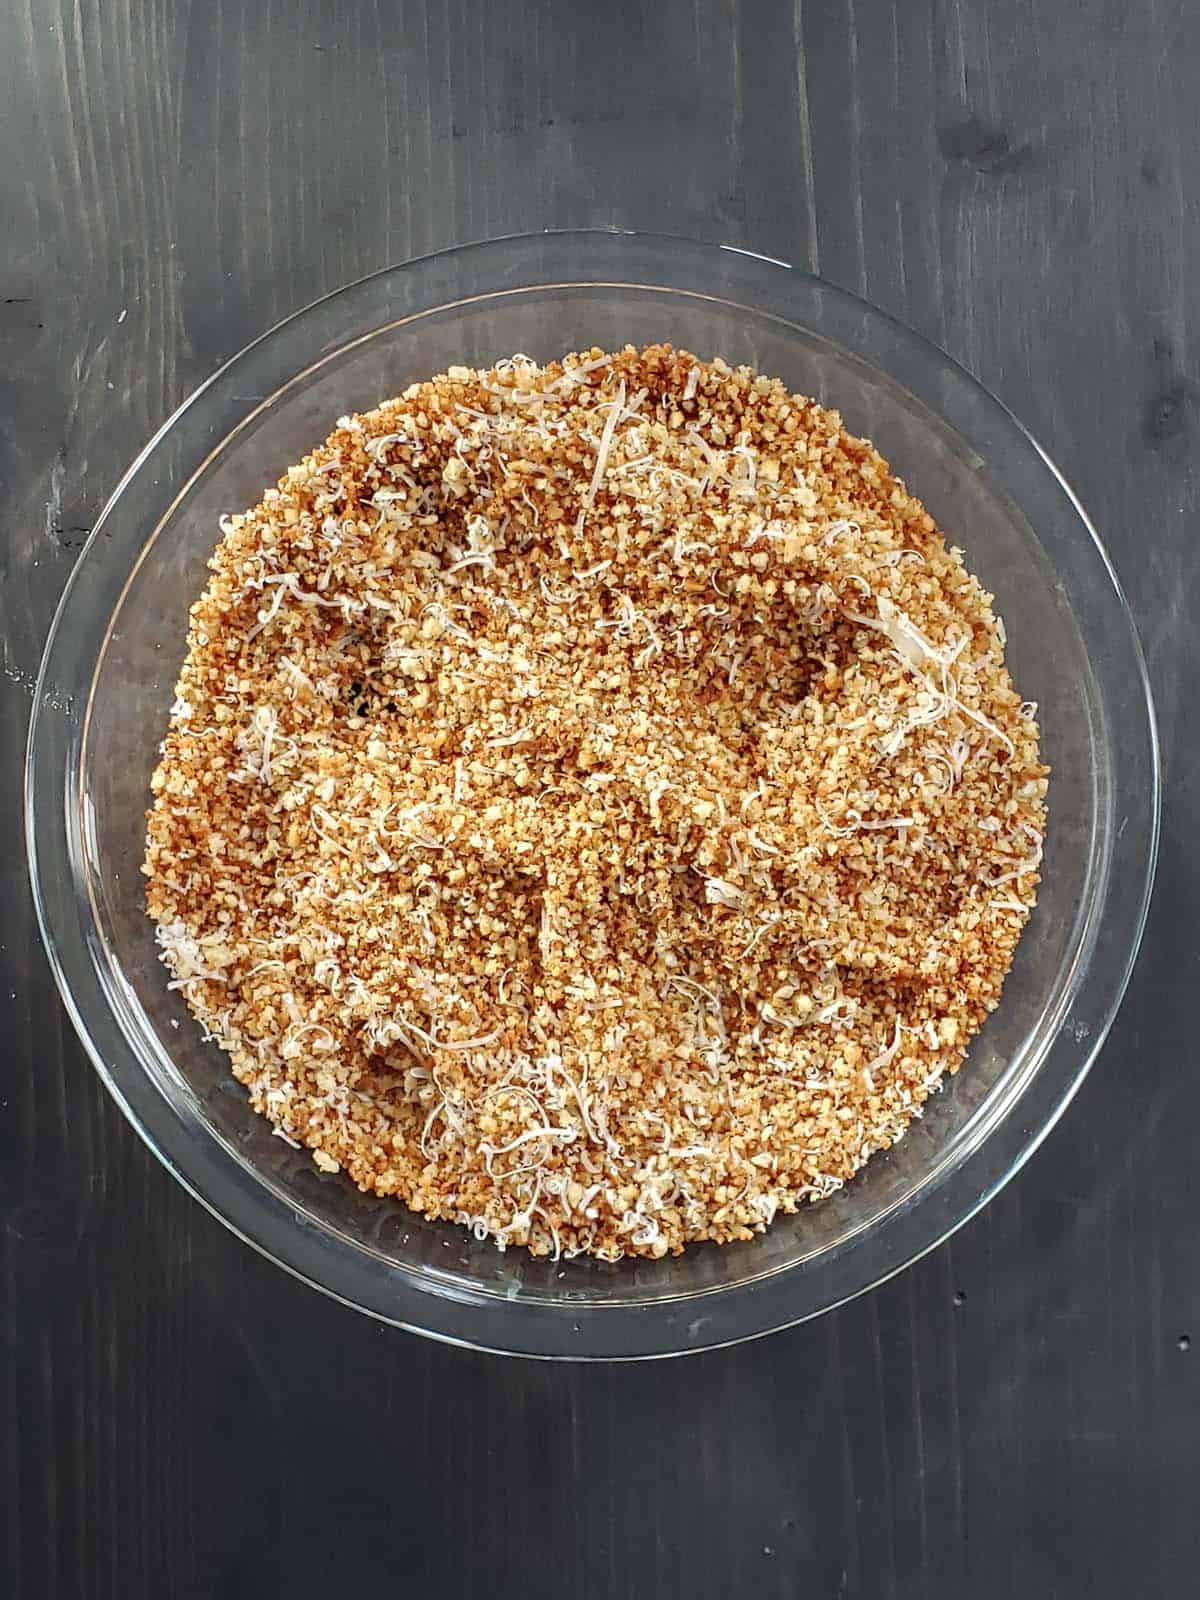 Toasted bread crumbs in a glass pie plate.